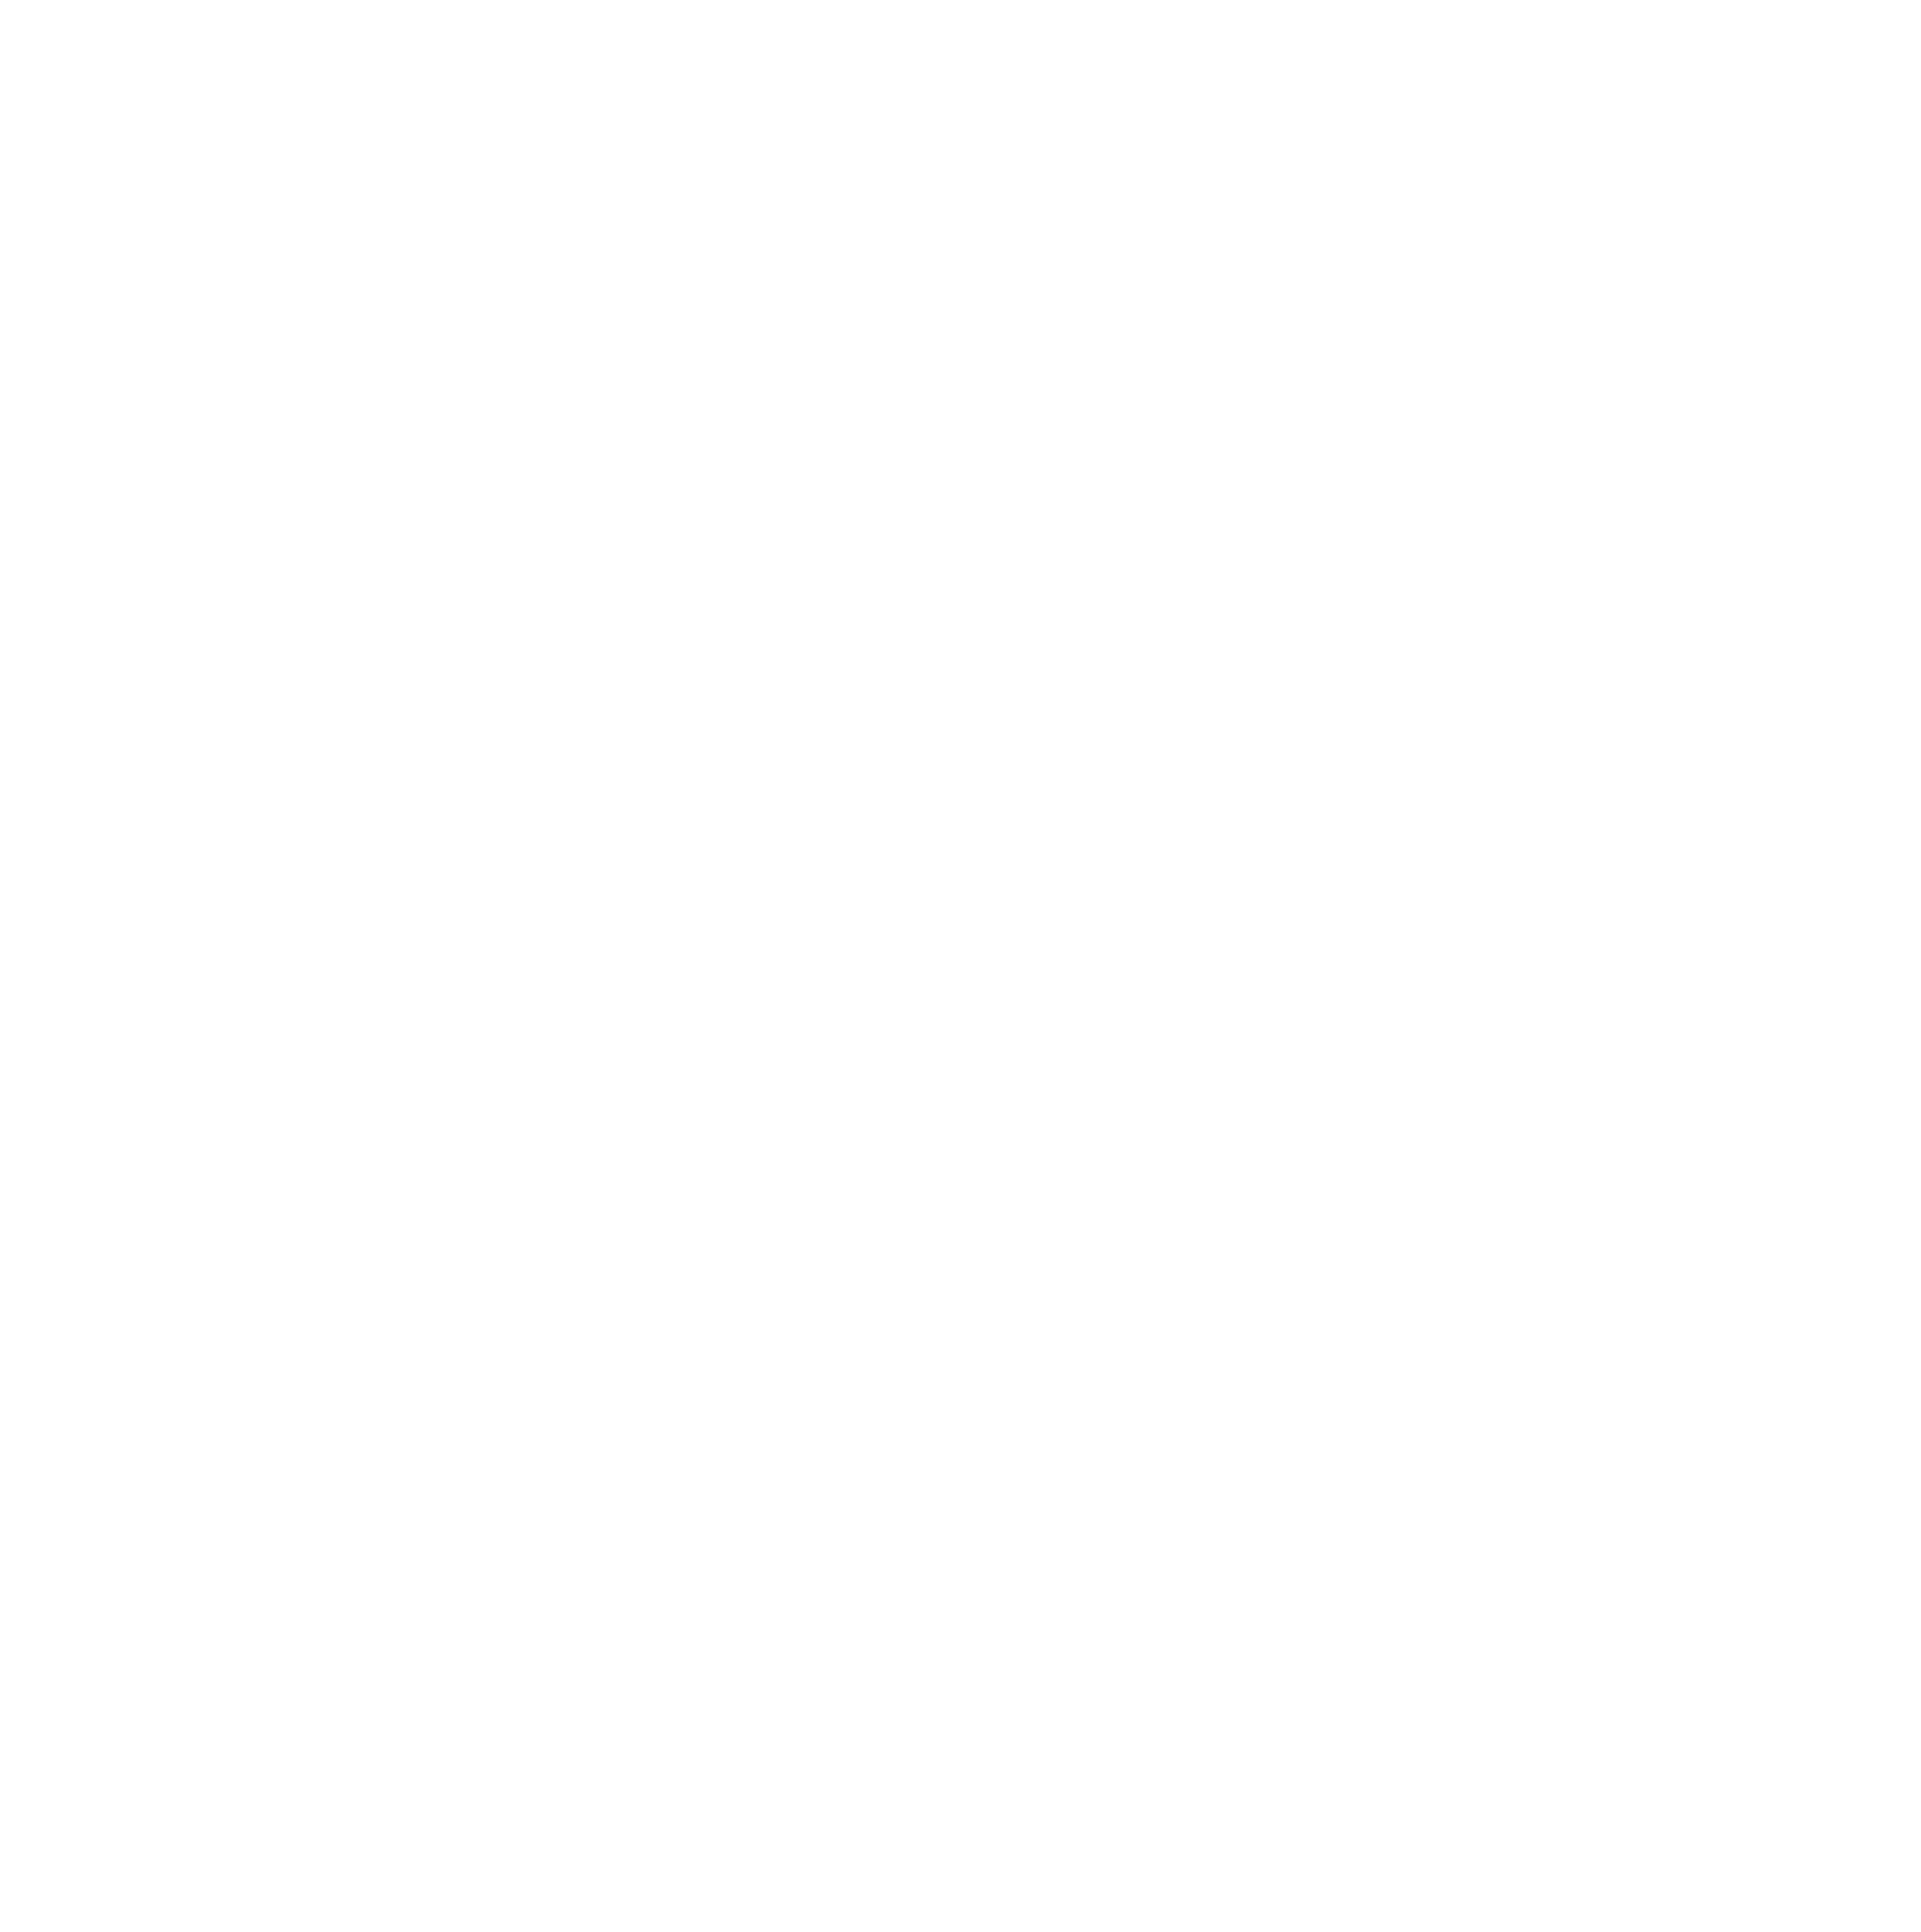 Umbra Motion Picture Company